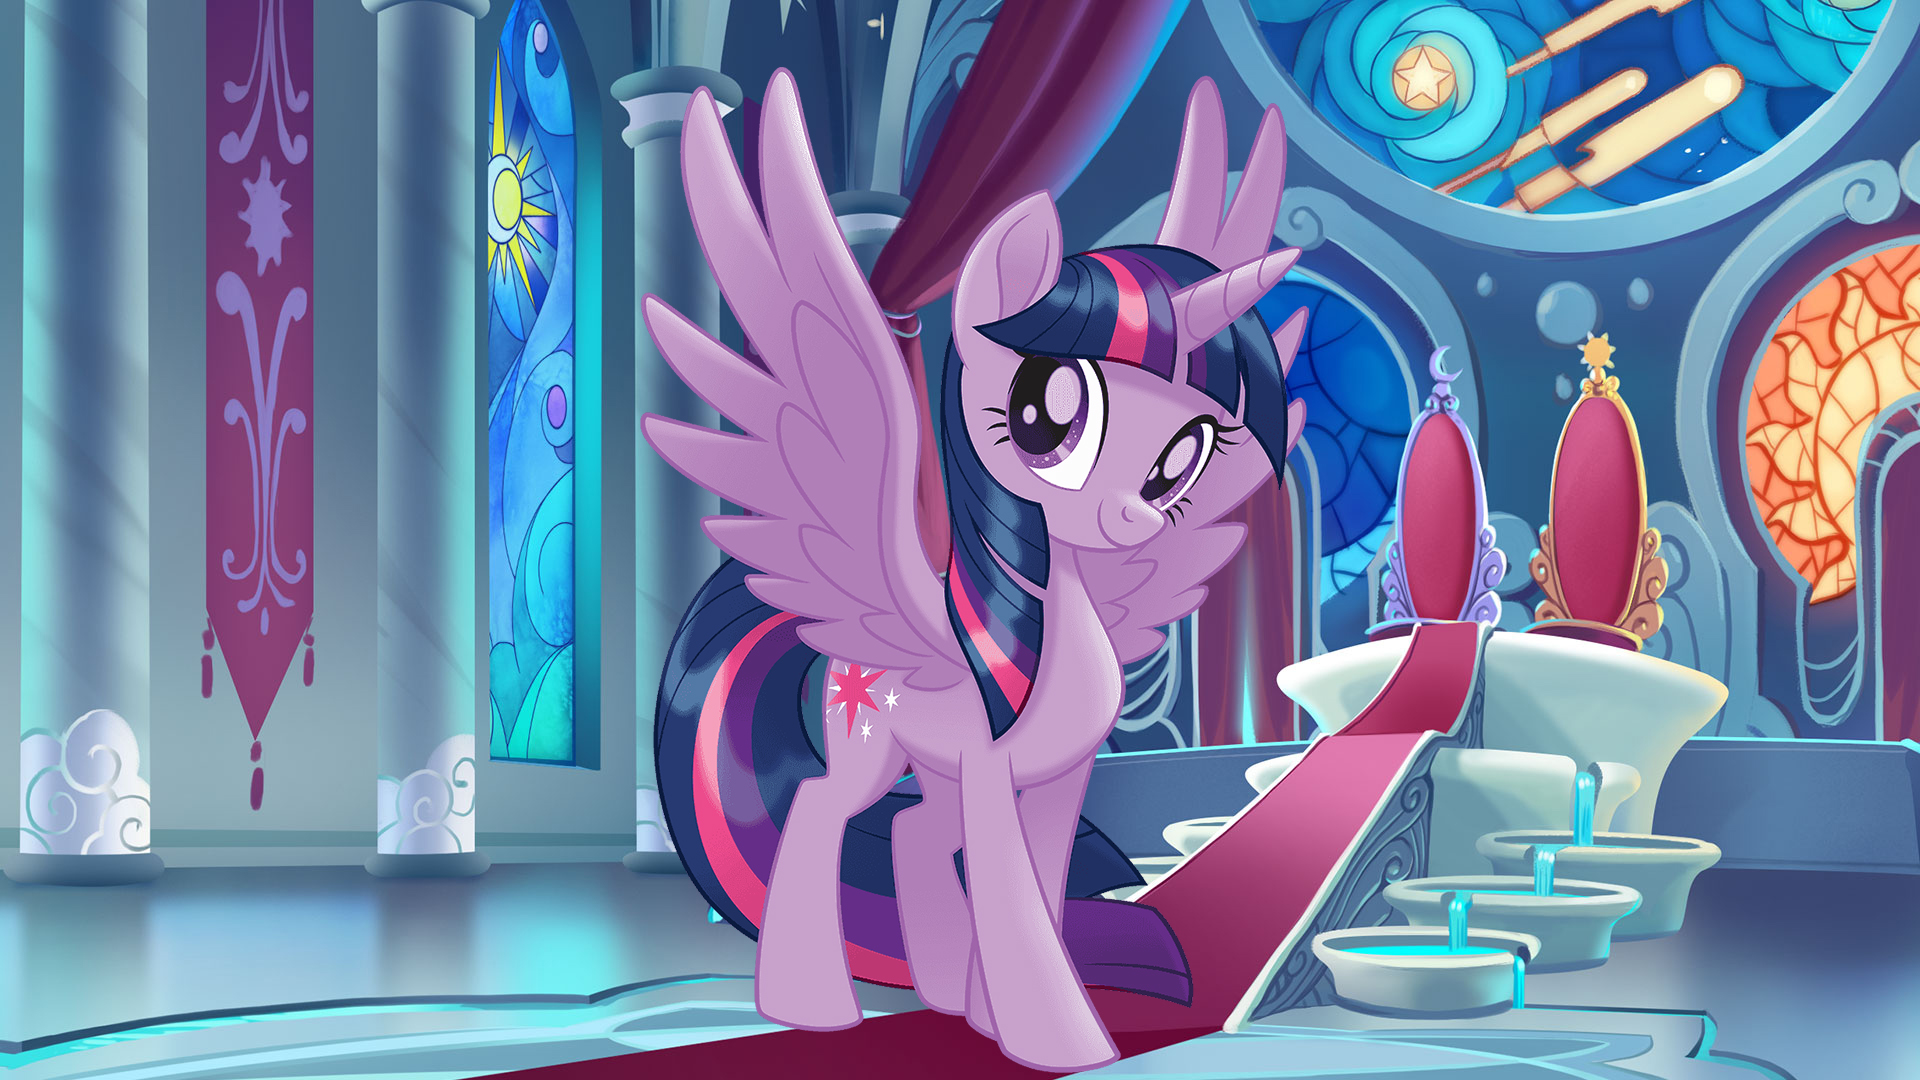 http://www.youloveit.com/uploads/posts/2017-08/1501837583_youloveit_com_my_little_pony_the_movie_wallpapers03.jpg